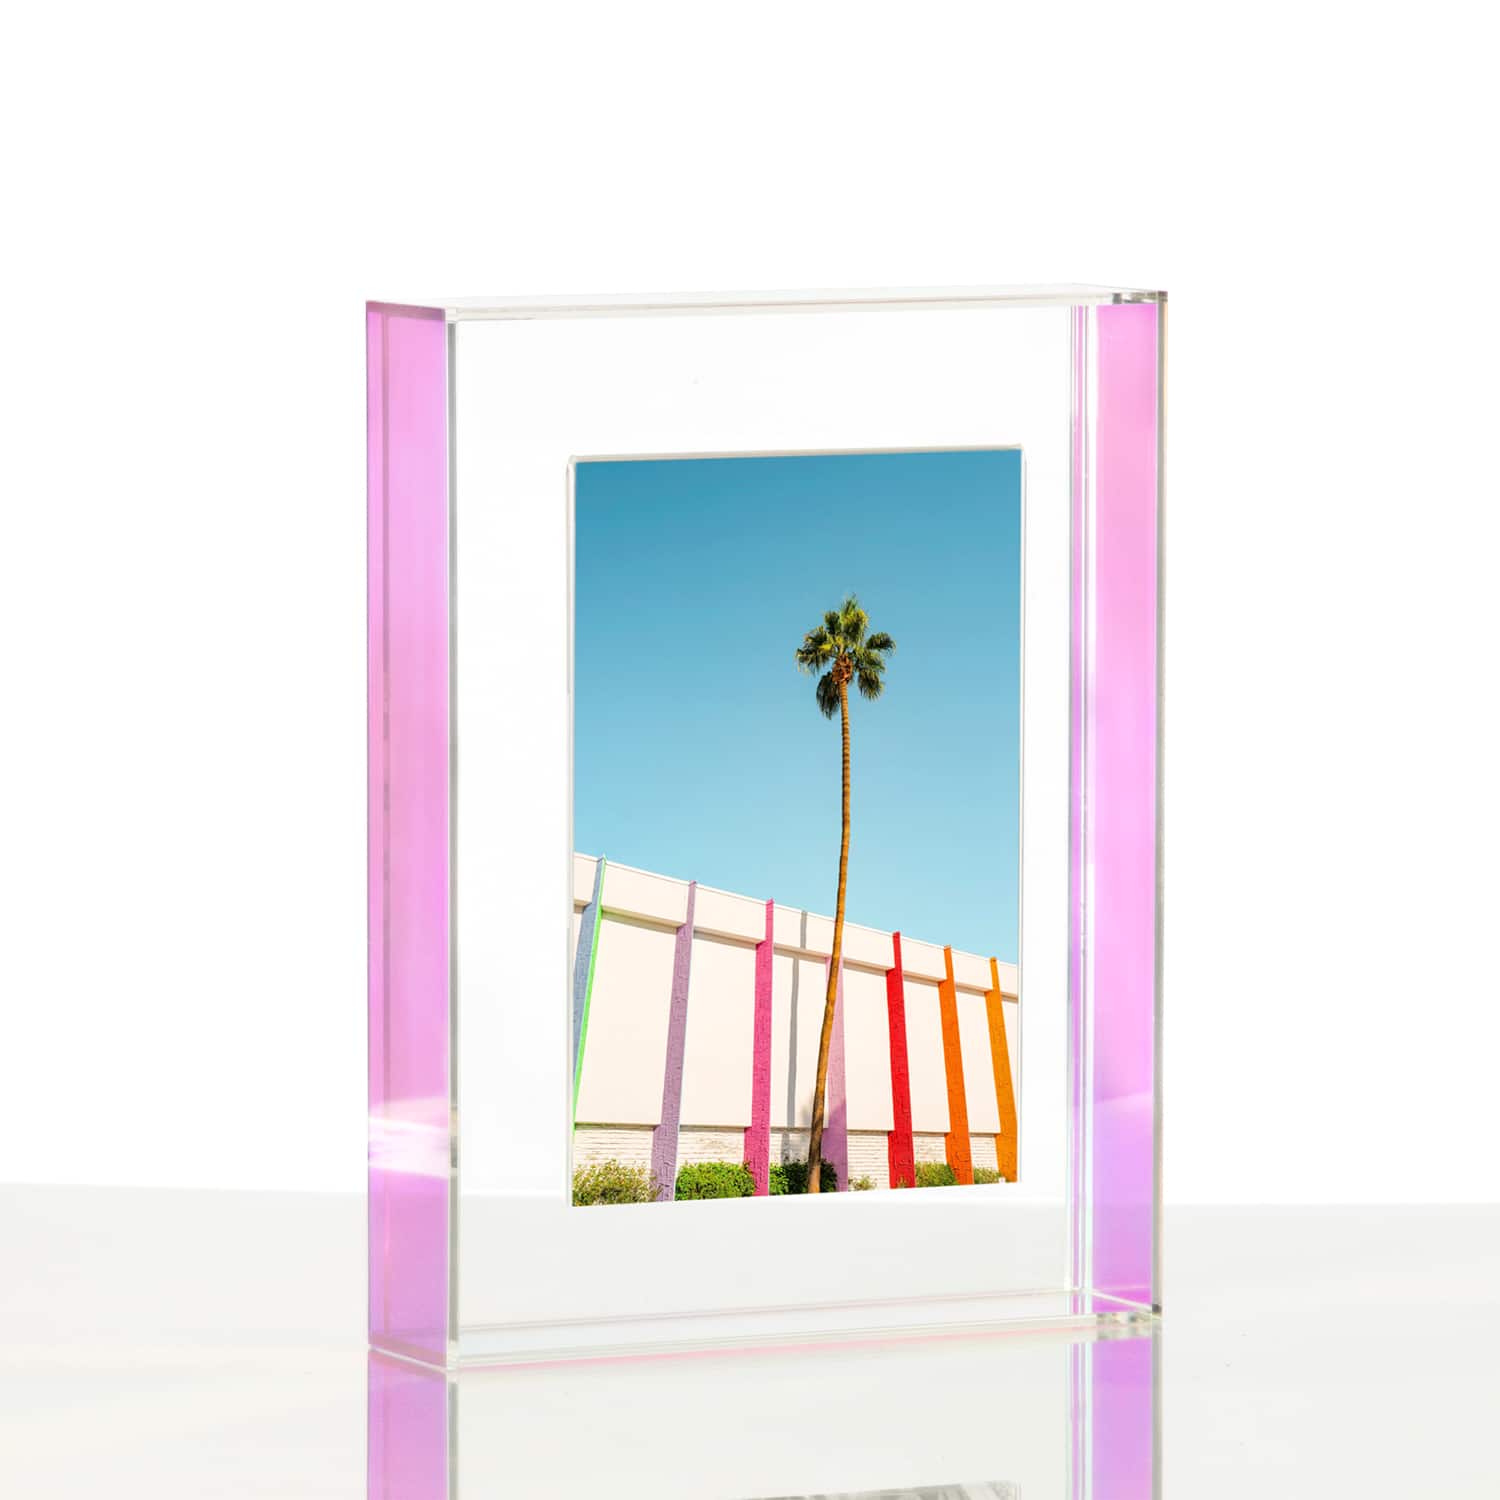 Wexel Art Iridescent Rainbow Float Frame with Magnetic Photo Holder